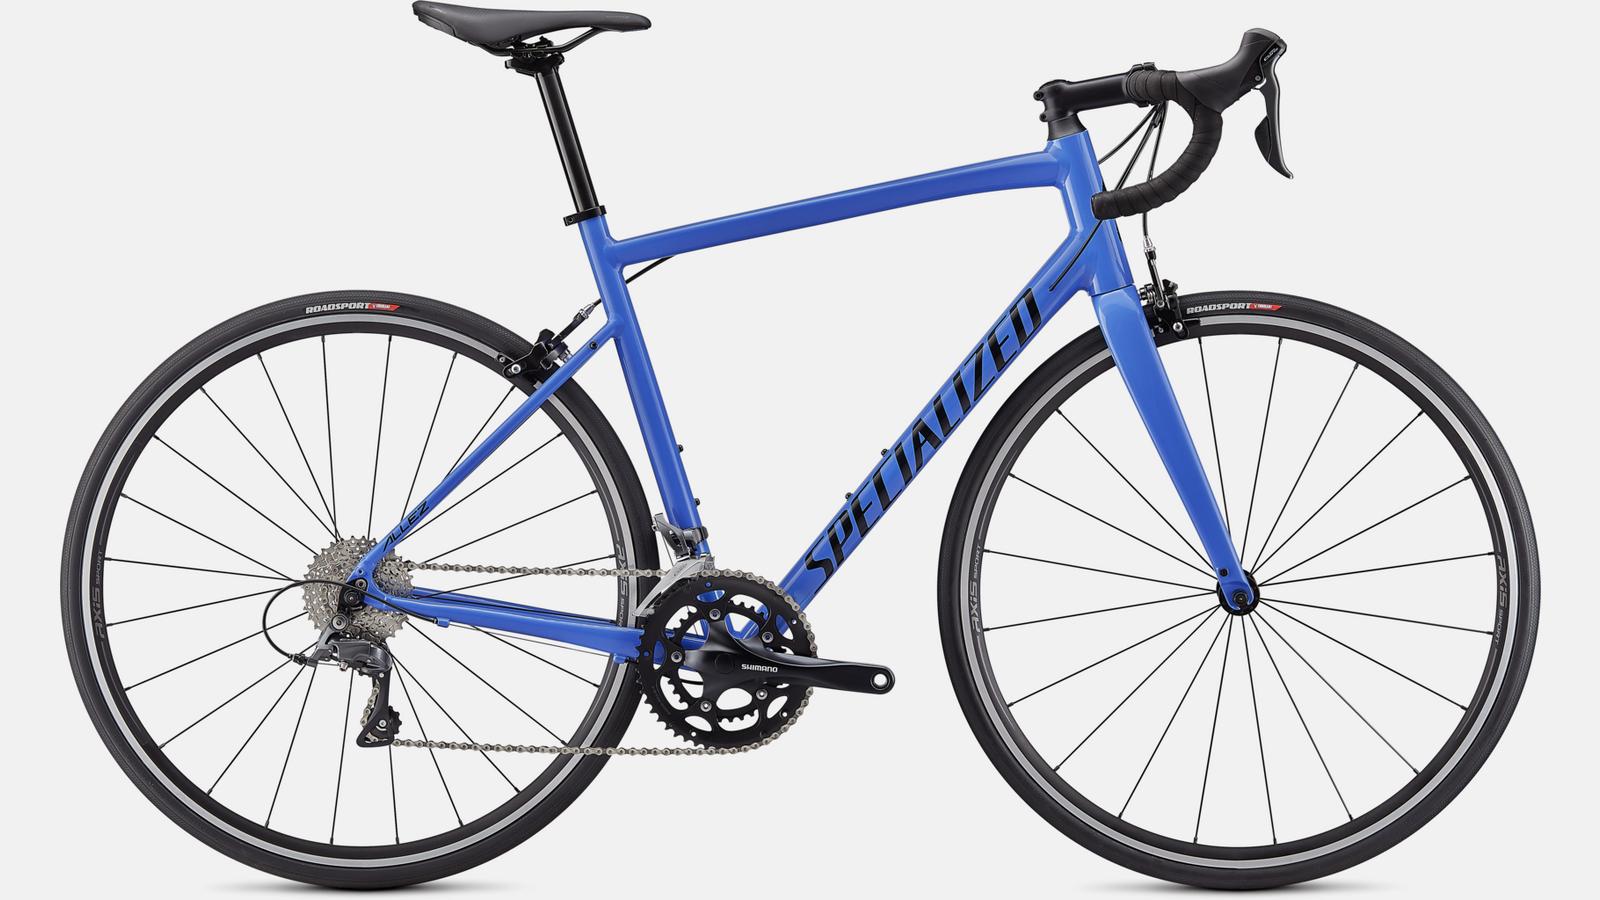 Paint for 2021 Specialized Allez - Gloss Sky Blue